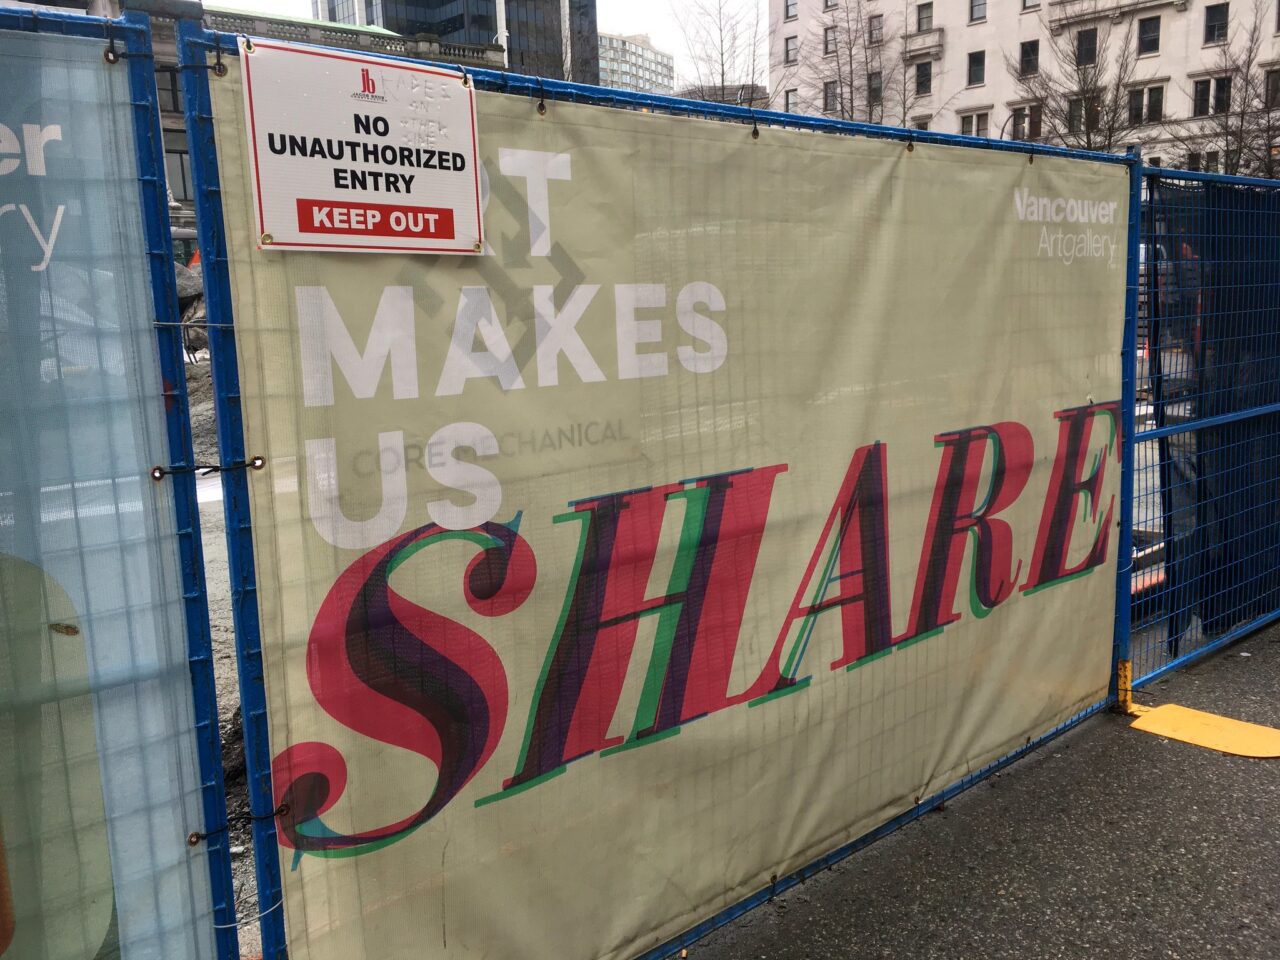 Sign on a construction fence reading in large text "It Makes Us Share" which seems in contradiction to a smaller sign that reads "no unauthorized entry keep out"